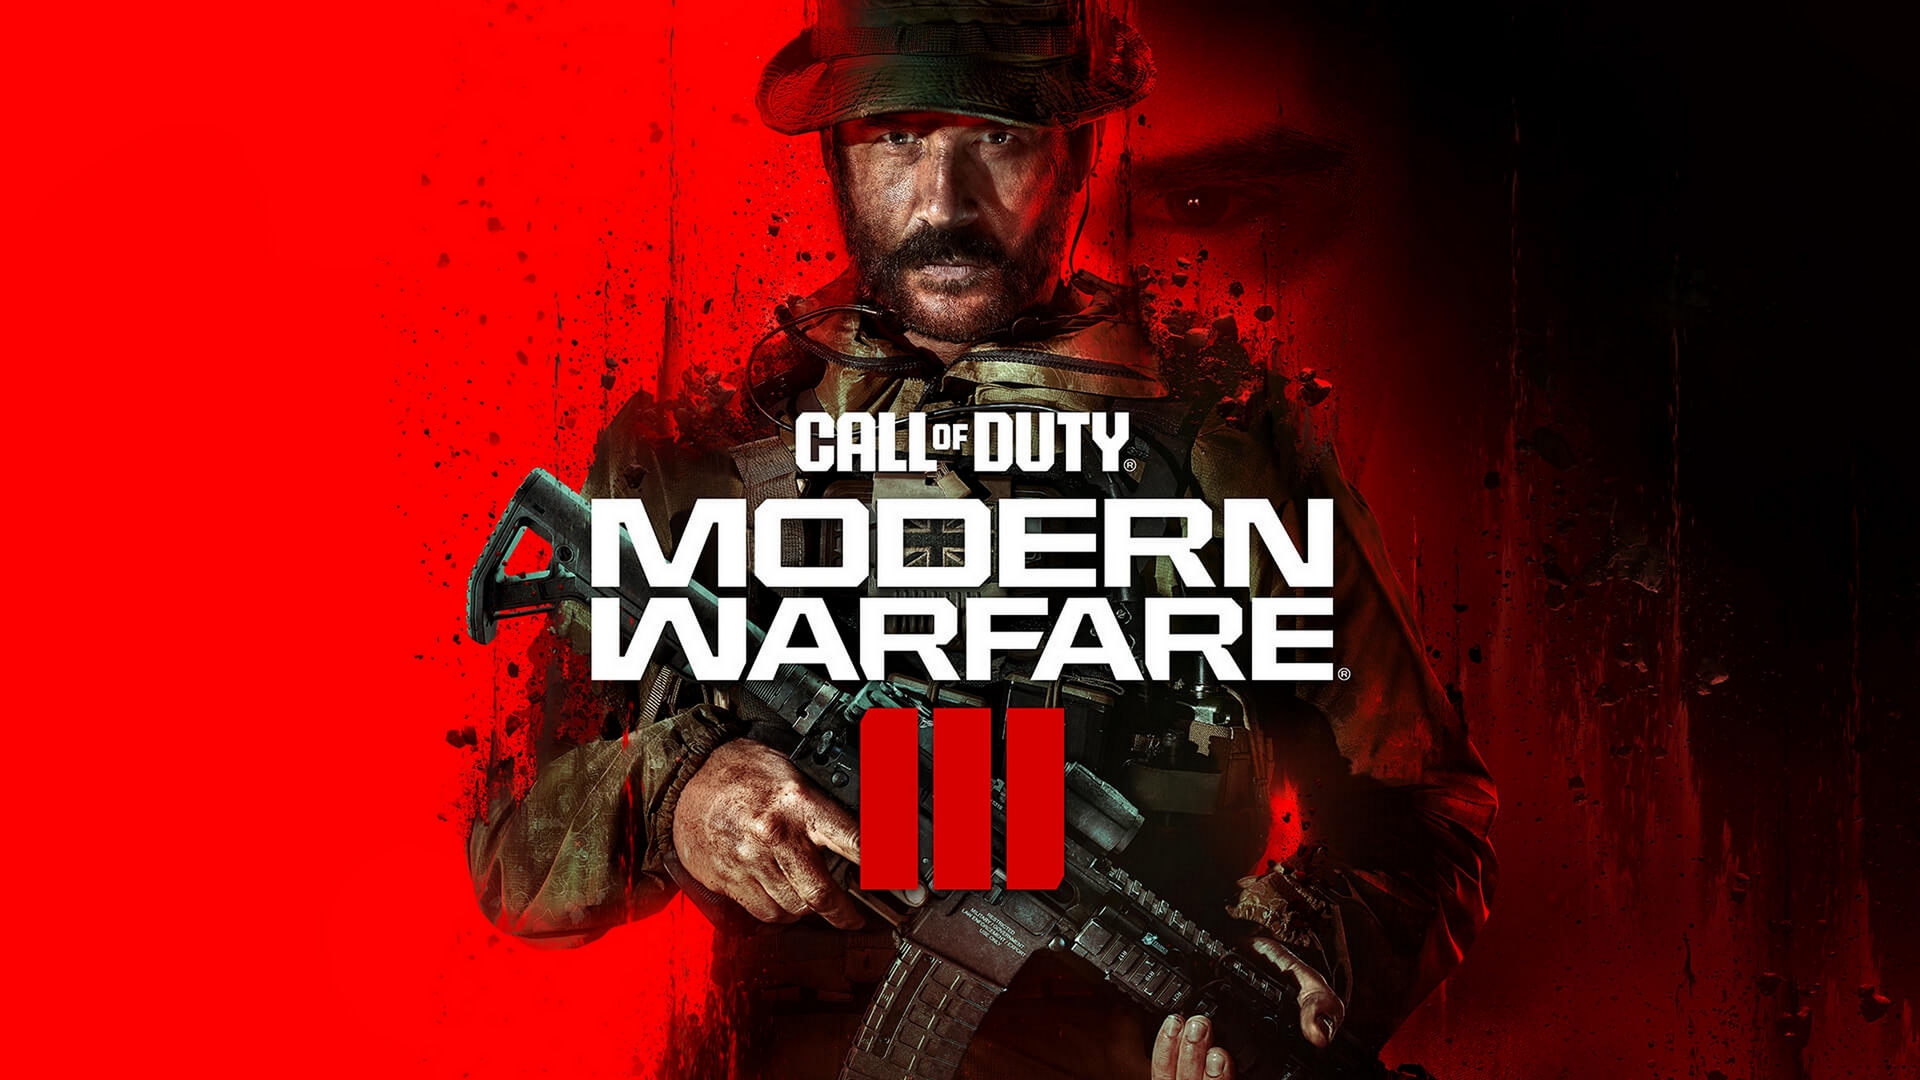 General 1920x1080 Call of Duty: Modern Warfare 3 Call of Duty 4: Modern Warfare MW3 video games Activision boys with guns beard Xbox hat looking at viewer title soldier gun men simple background